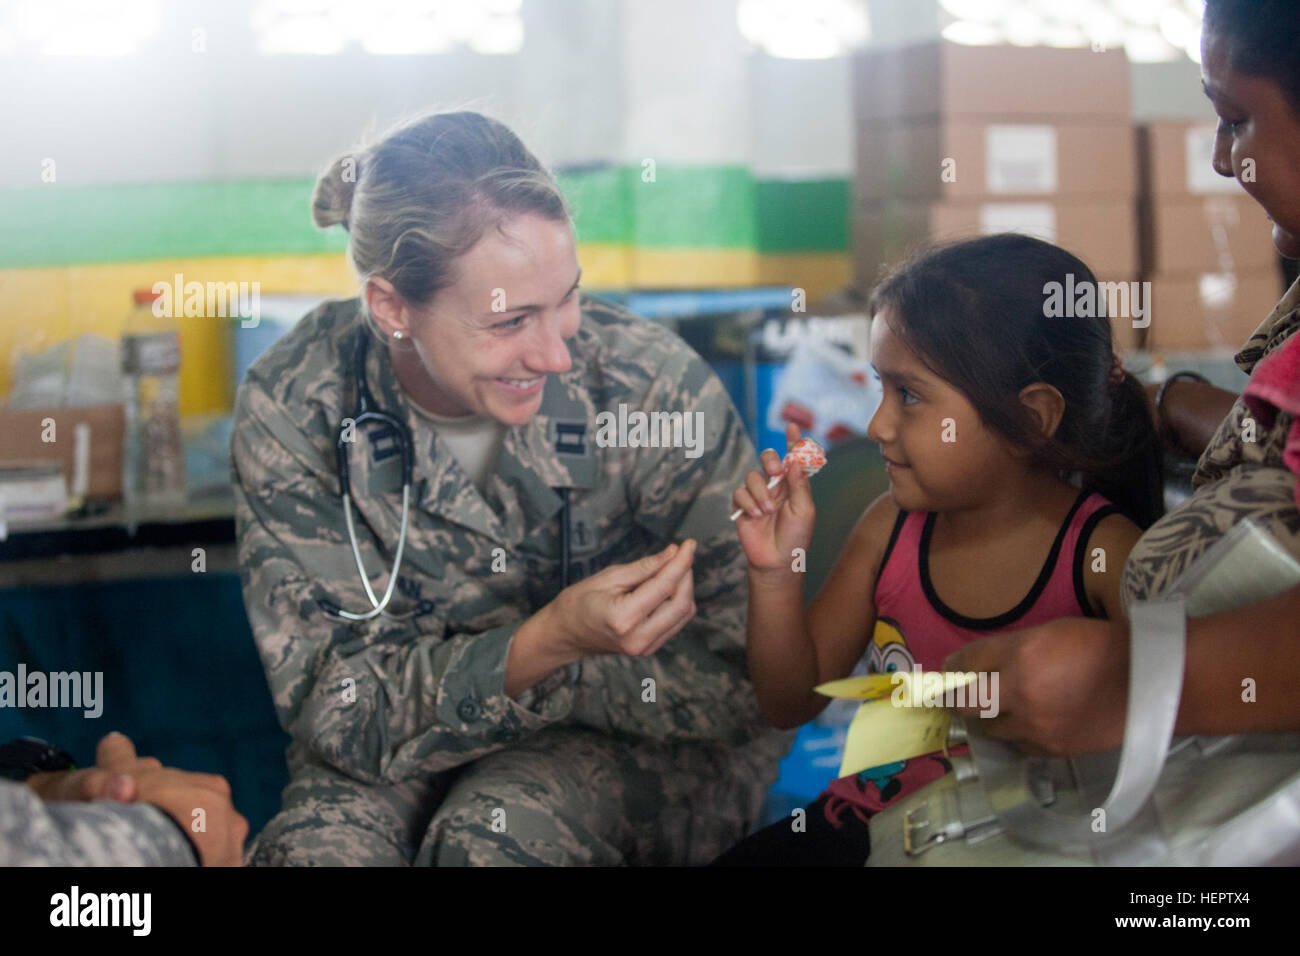 U.S. Air Force Capt. Erin Senozan of the 81st Medical Group, Keesler Air Force Base, gives a child candy after a check up during a medical readiness exercise in La Blanca, Guatemala, May 28, 2016. Task Force Red Wolf and Army South conducts Humanitarian Civil Assistance Training to include tatical level construction projects and medical readiness Training Exercises providing medical access and building schools in guatemala with the Guatamalan Government and non government agencies from 05Mar16 to 18JUN16 in order to improve the mission readiness of US Forces and to provide a lasting benefit to Stock Photo